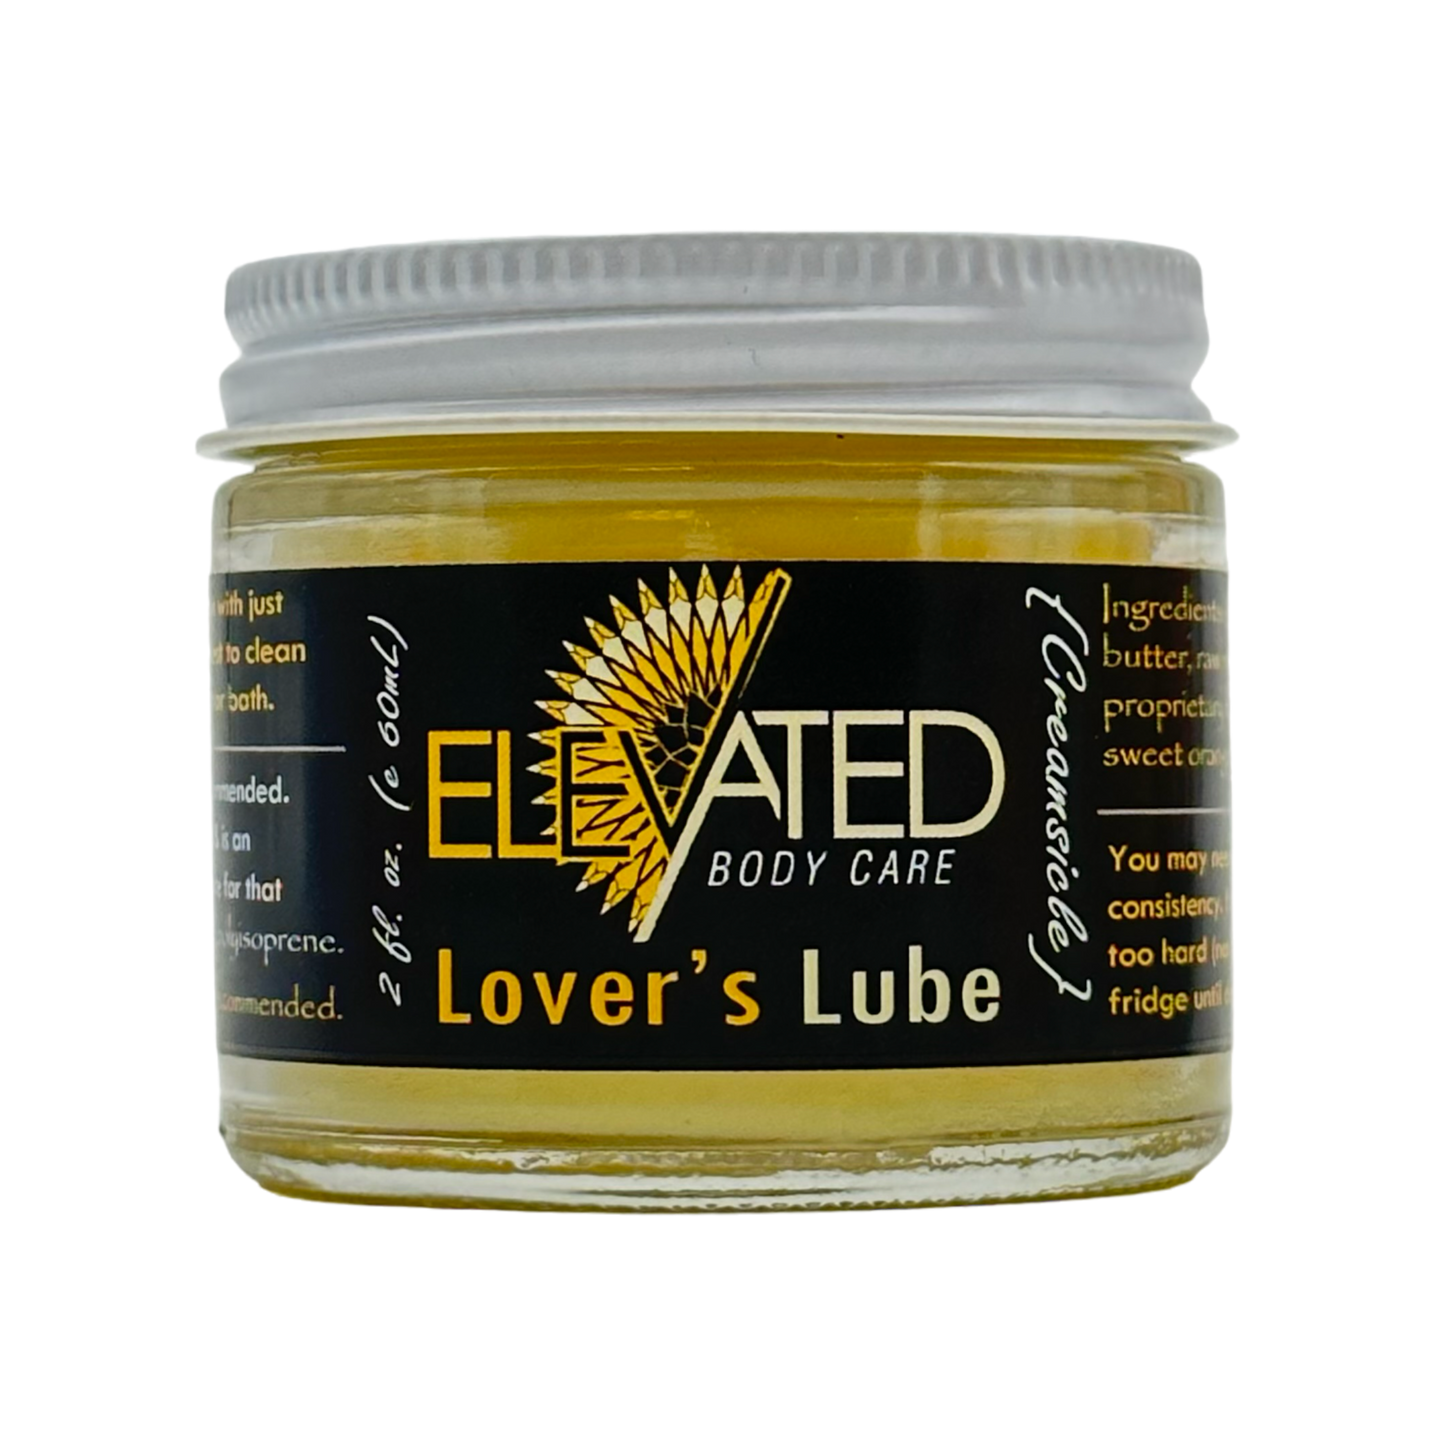 ELEVATED - Lover's Lube * Plastic-Free * Zerowaste * ALL Natural